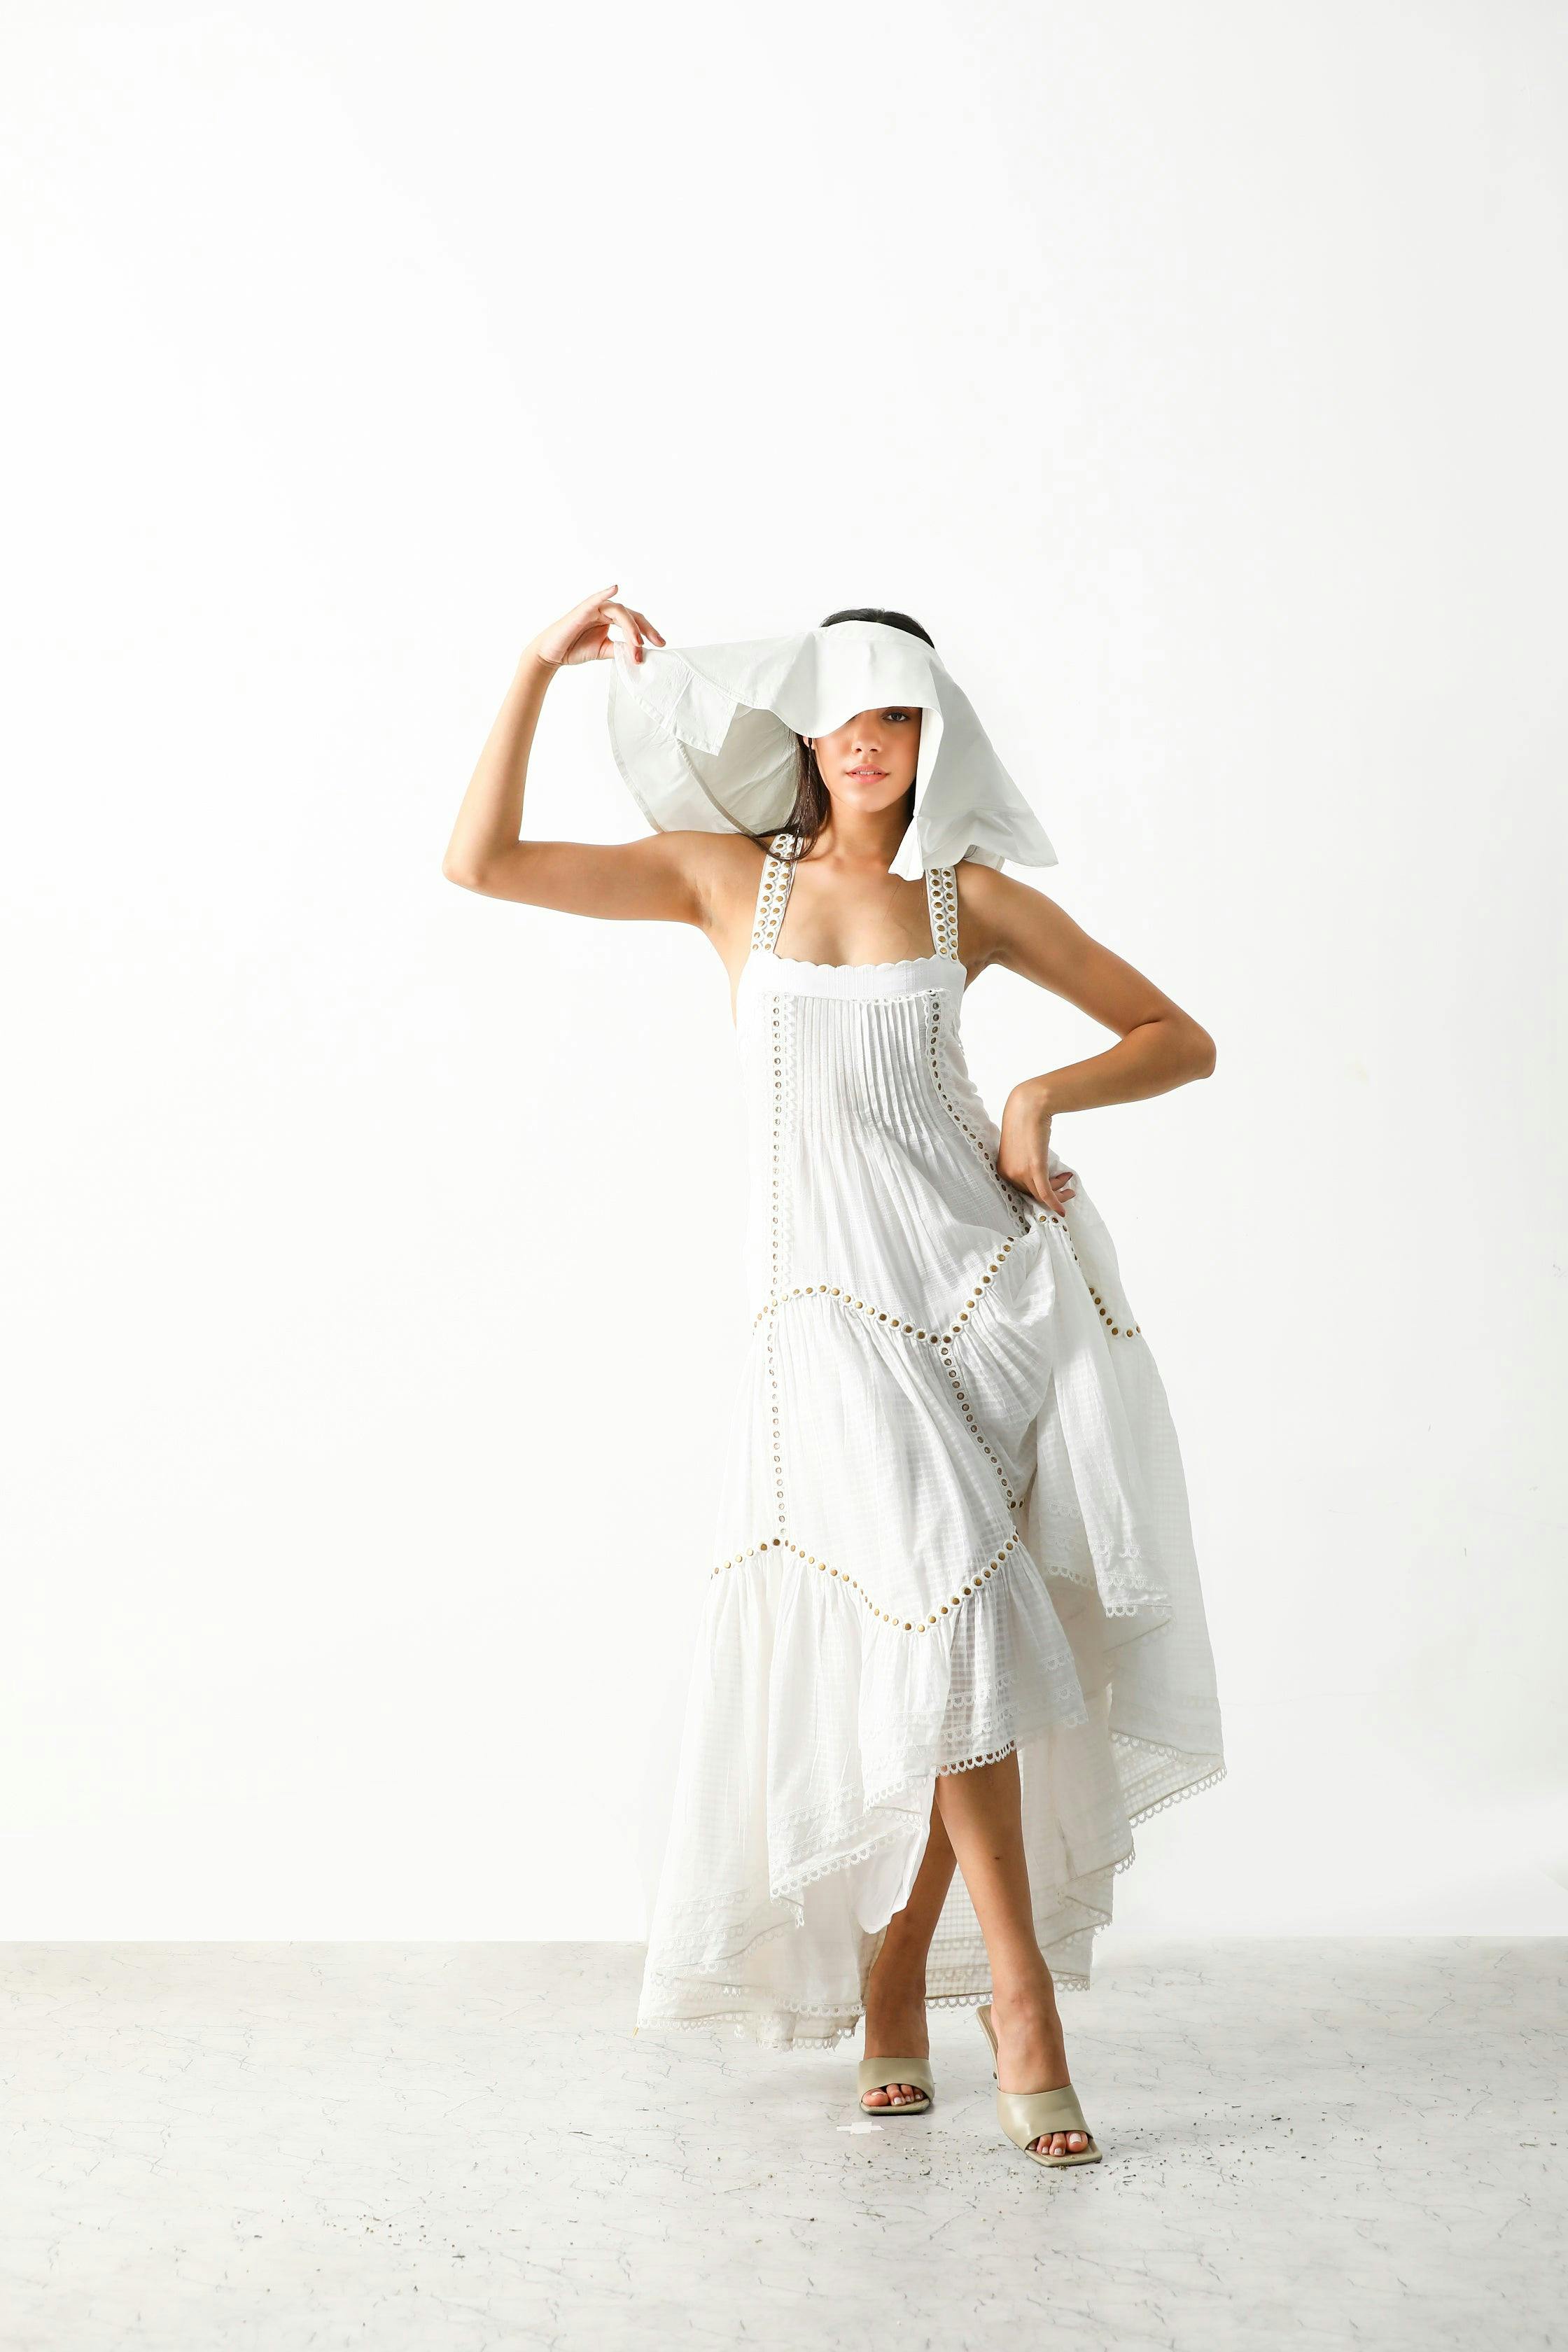 Sorin Assymetrical Midi Dress, a product by THE IASO